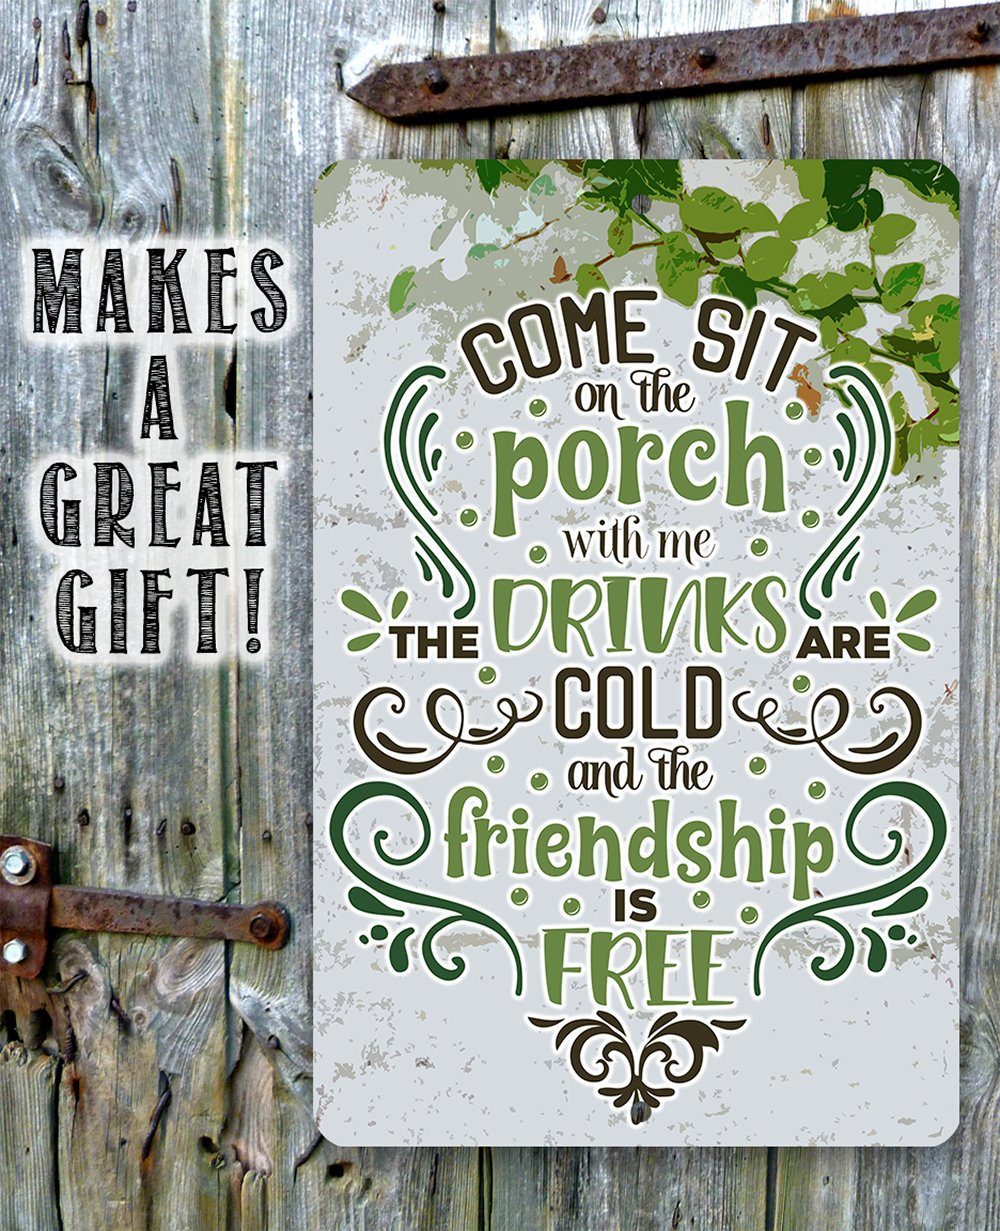 Come Sit on the Porch With Me - Metal Sign | Lone Star Art.